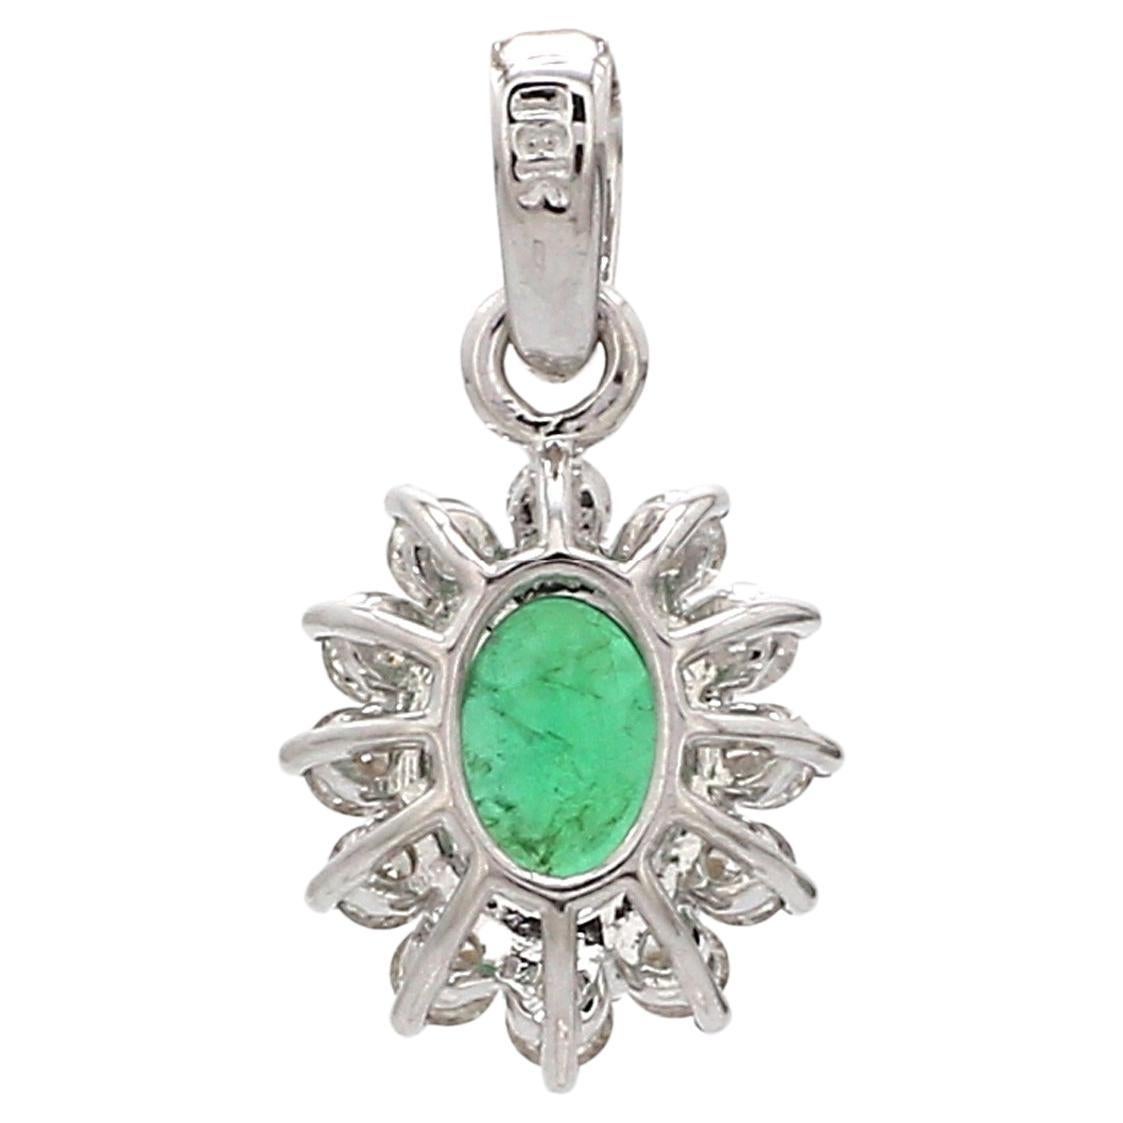 This Natural Emerald Gemstone Charm Pendant is not only a beautiful accessory but also a symbol of natural beauty and individuality. It exudes a sense of elegance and refinement, making it a perfect choice for both formal occasions and everyday